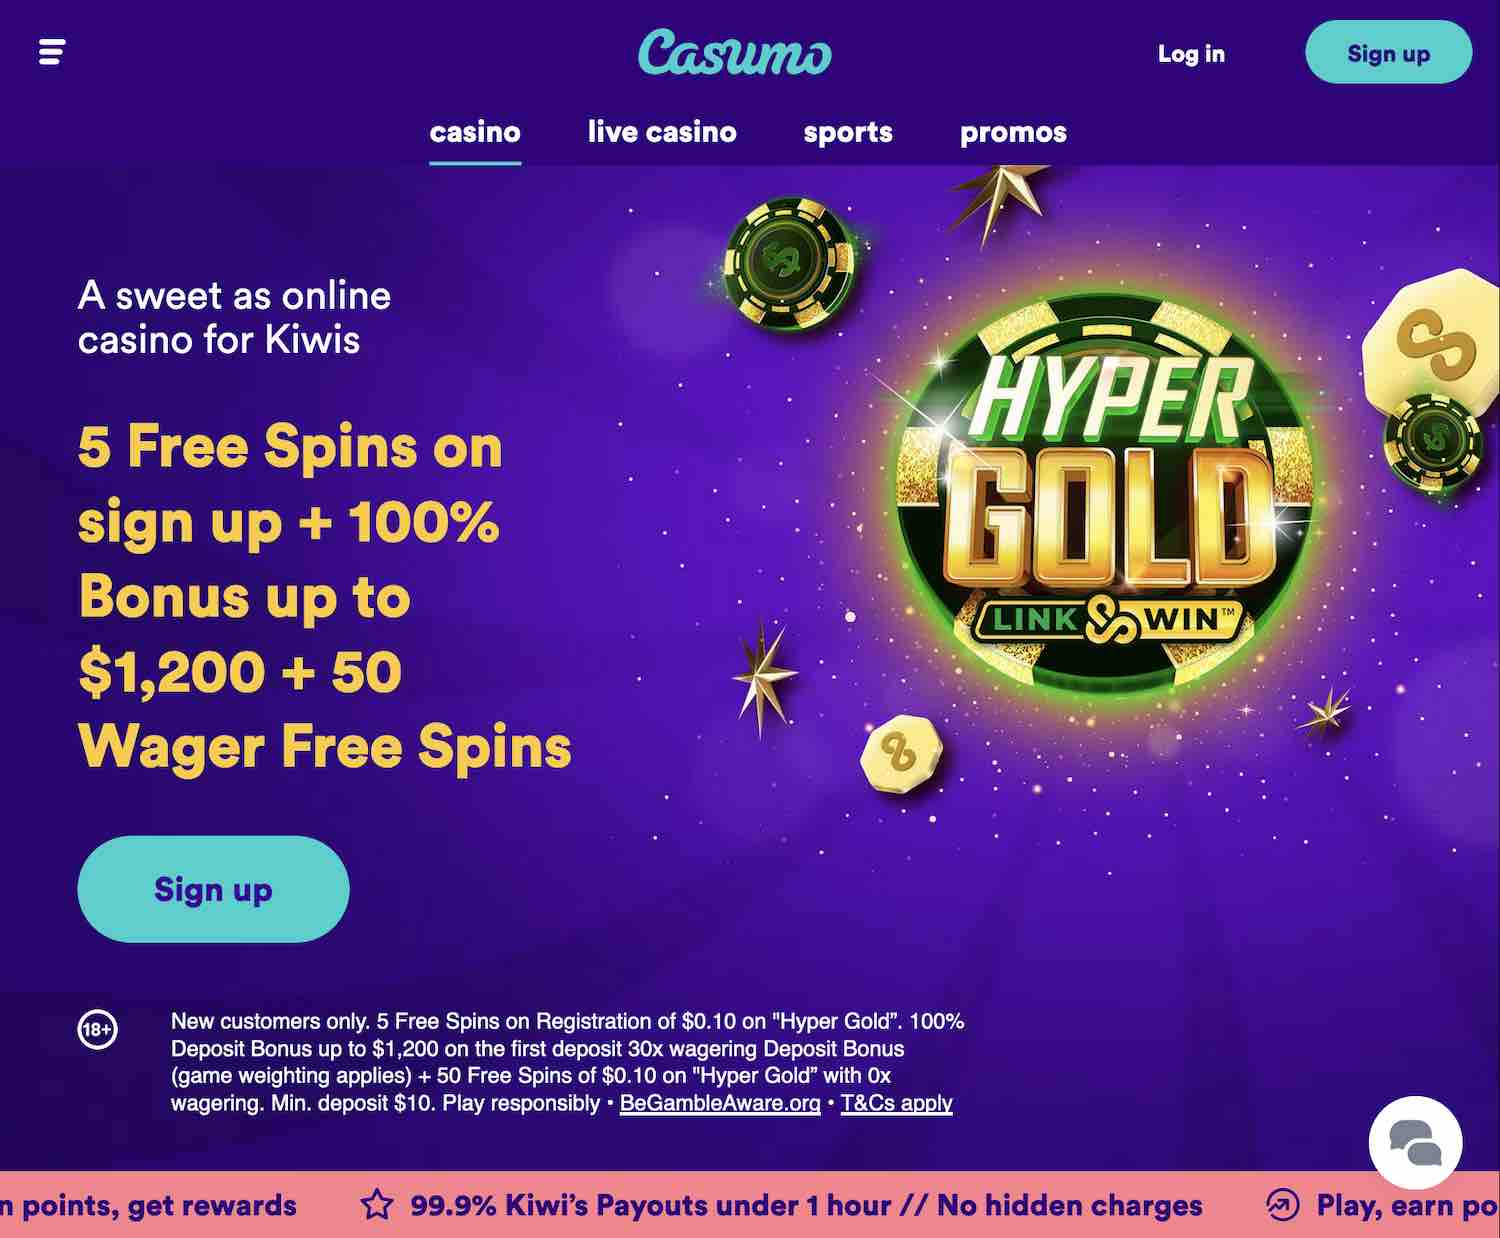 Casumo is a top casino site, with pokies, live casino games and sports betting all covered